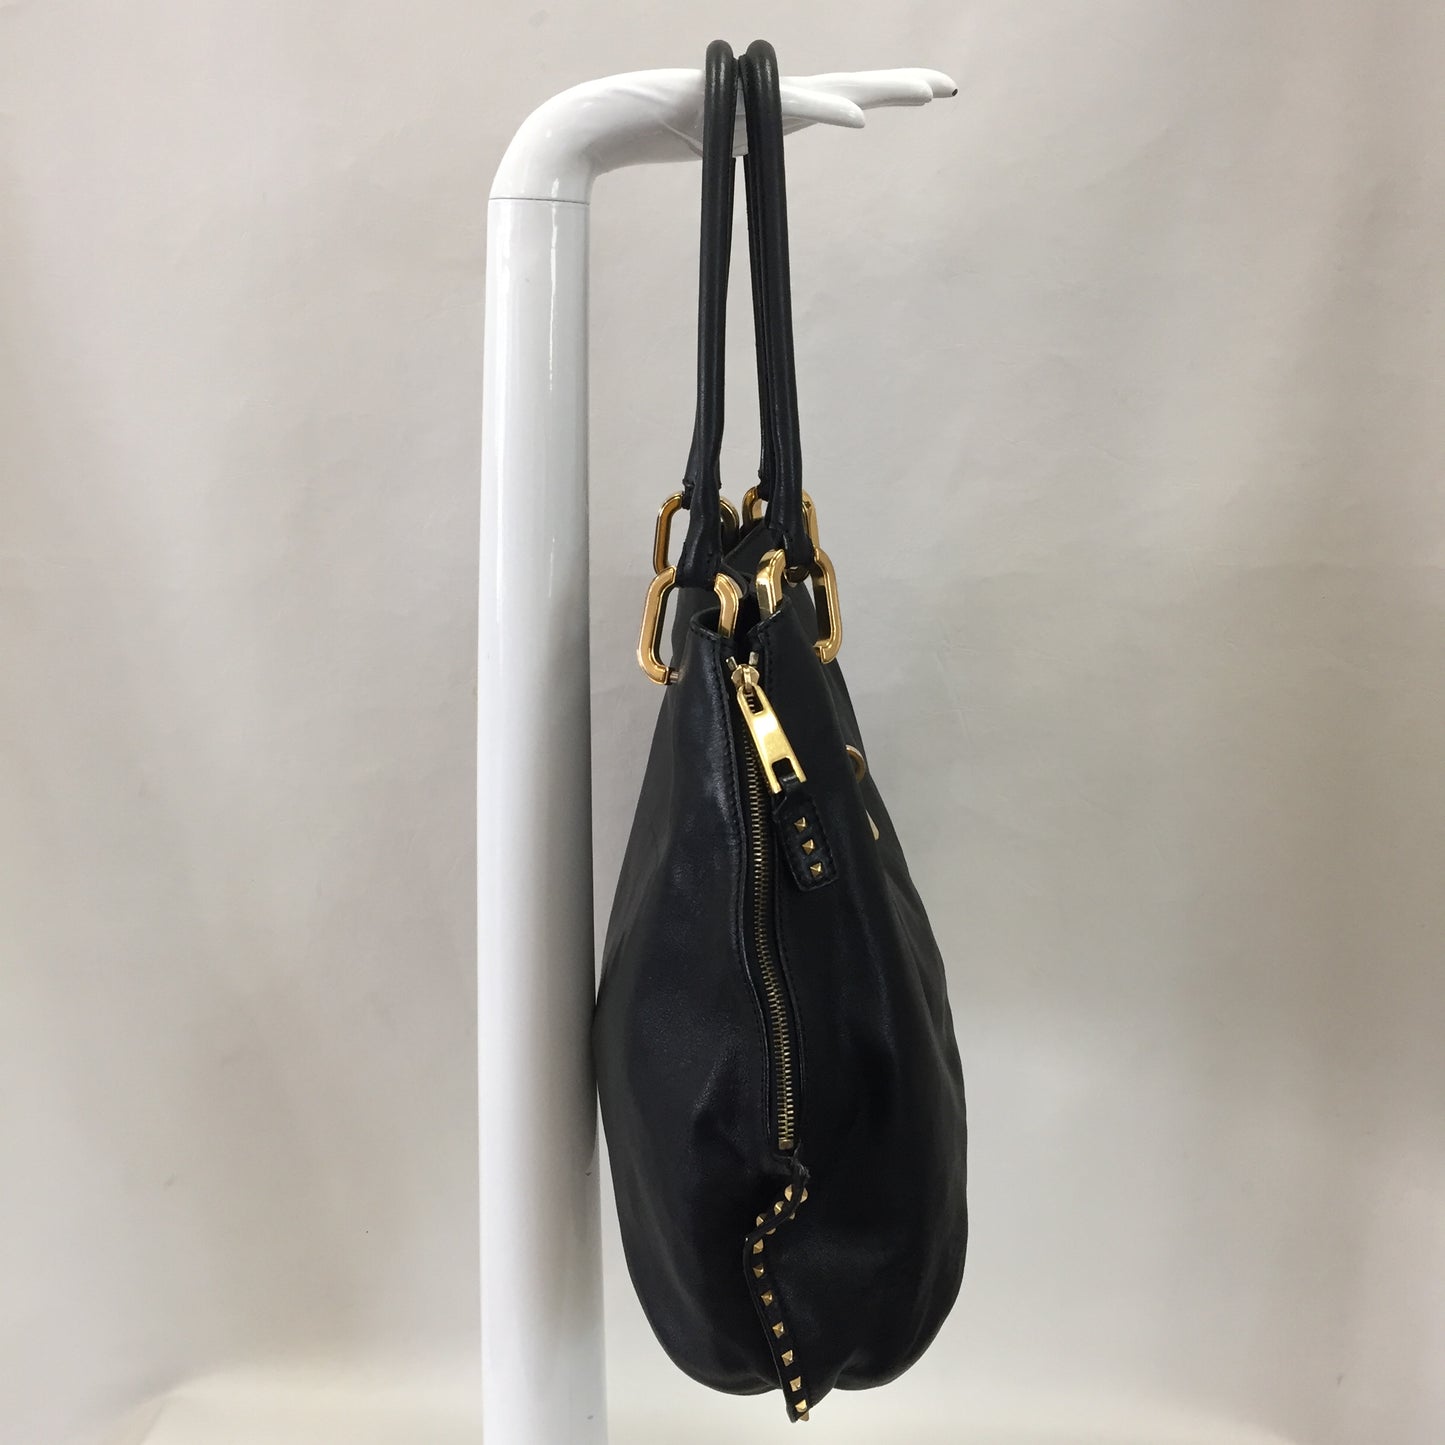 Authentic Marc Jacobs Black Leather Paradise "Amber" Studded Hobo Tote